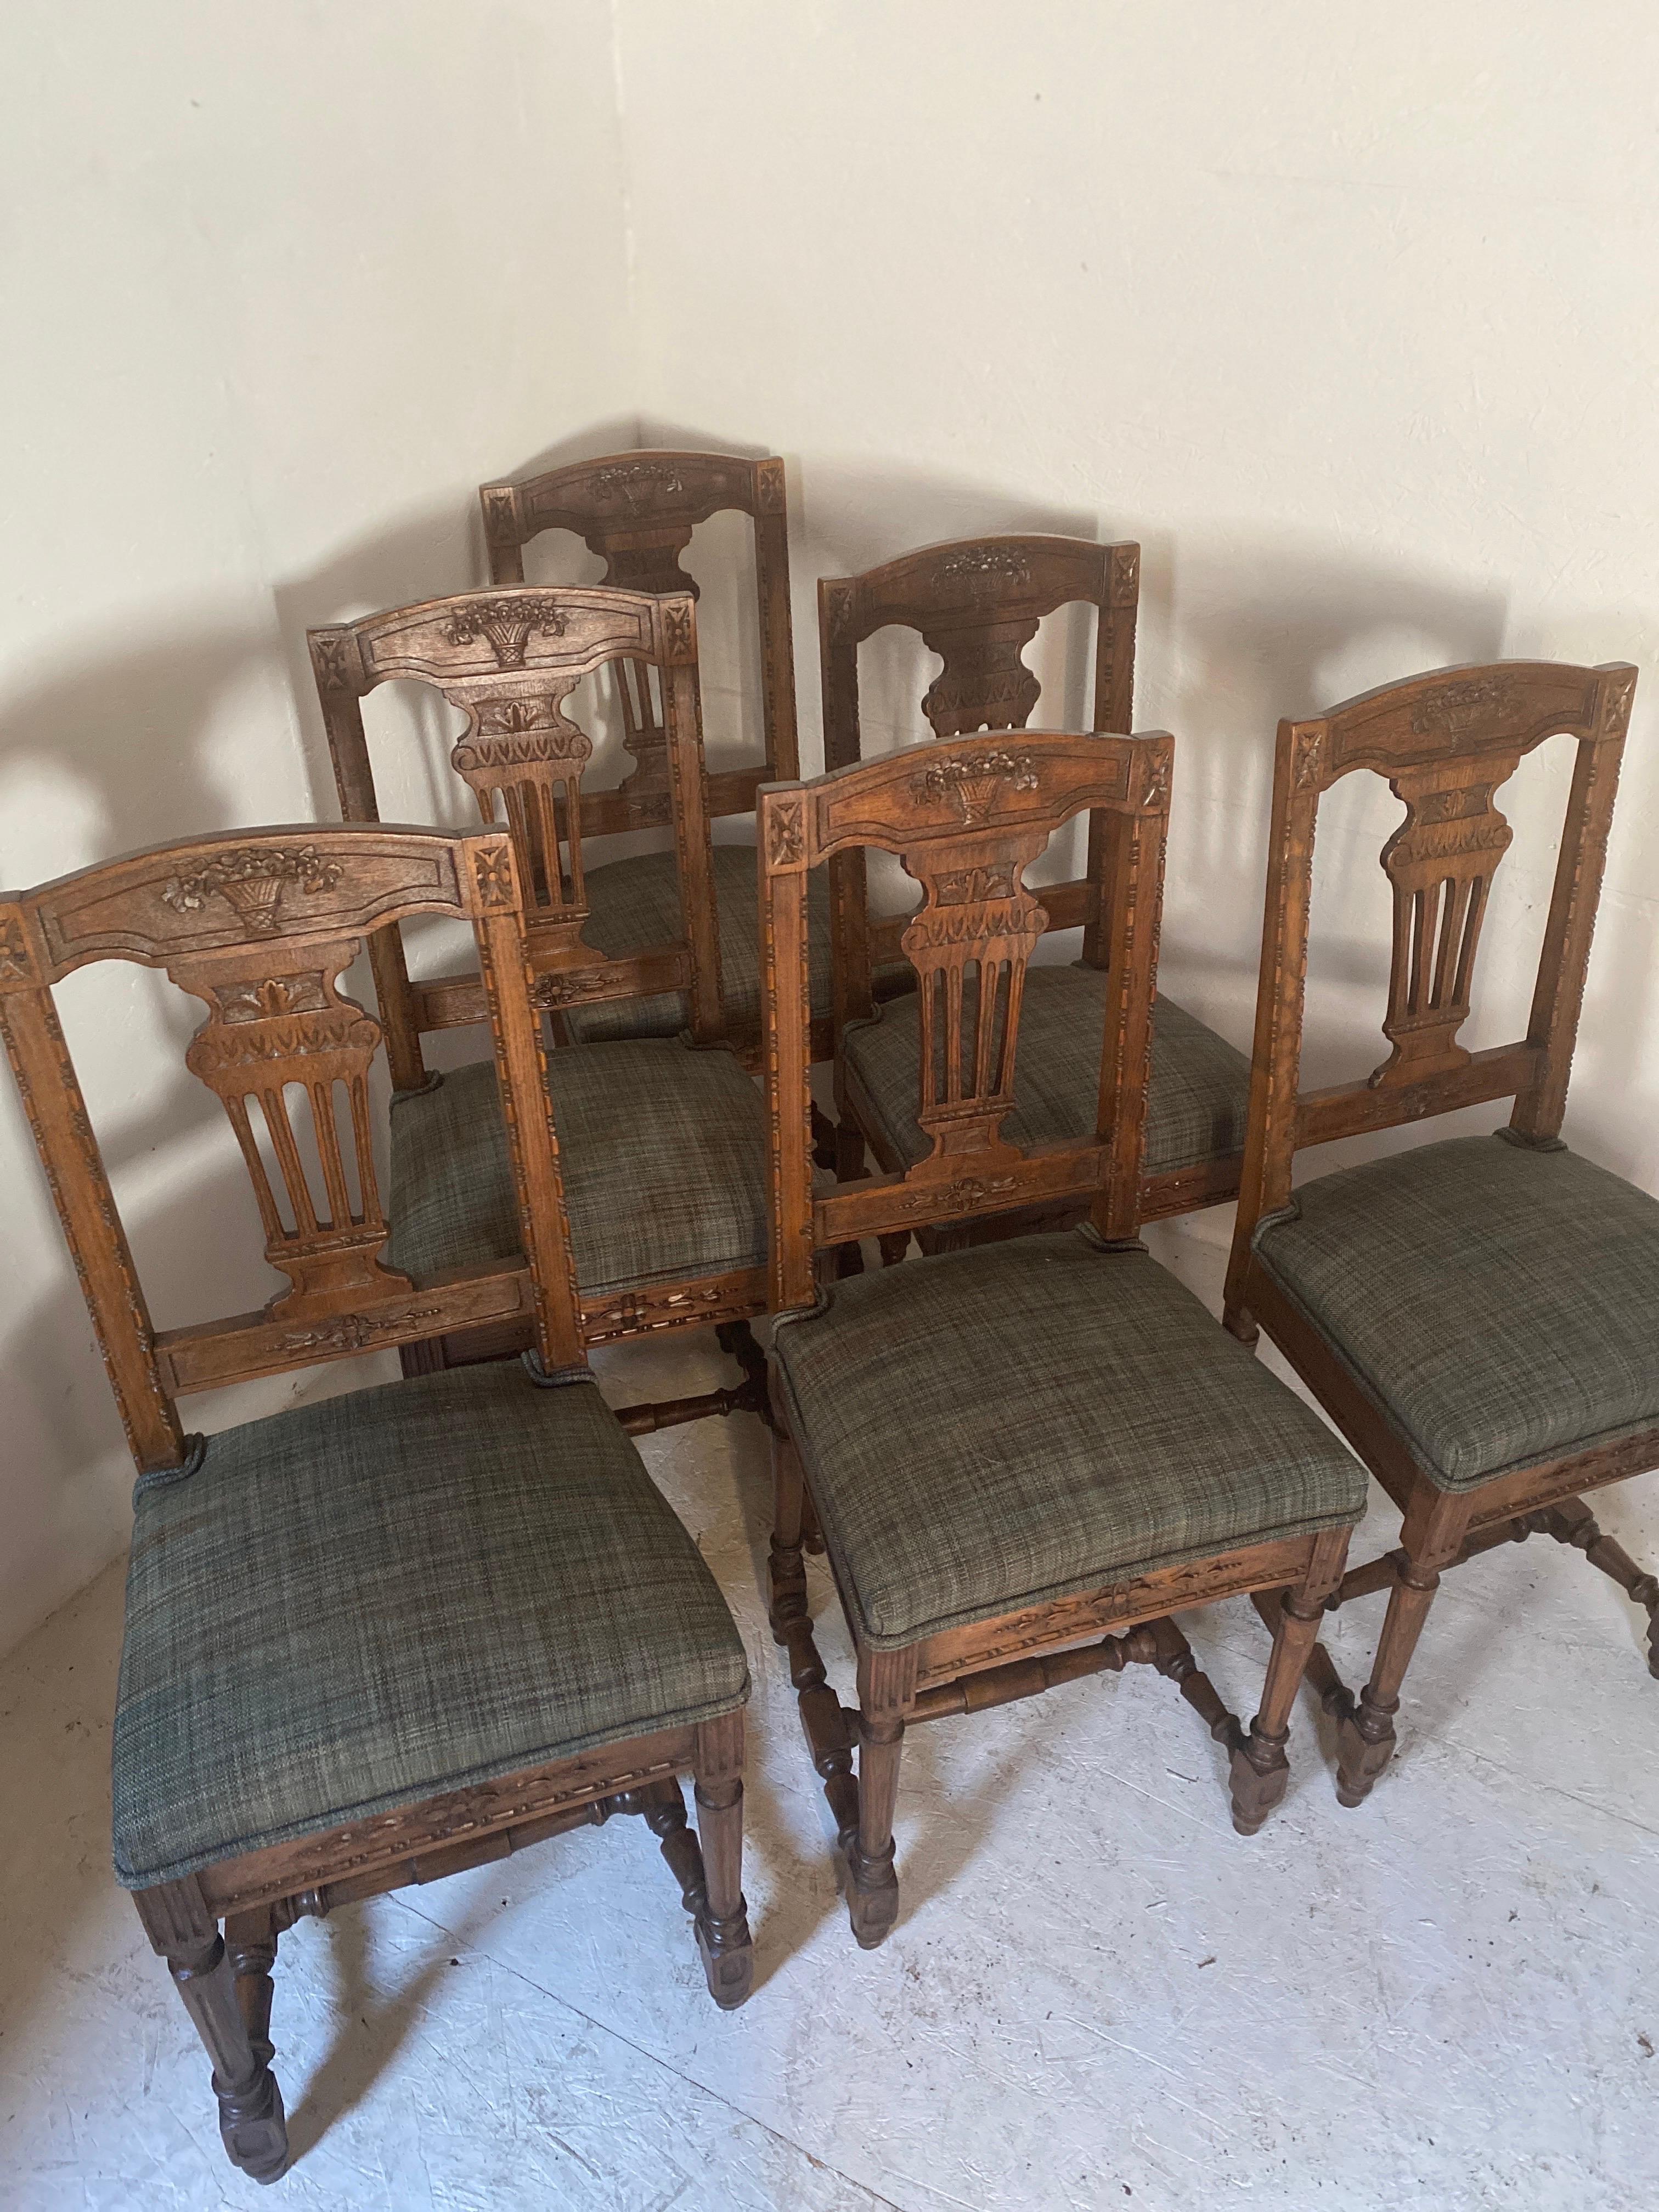 very beautiful set of 6 chairs reupholstered with magnificent 19th century directoire style fabrics